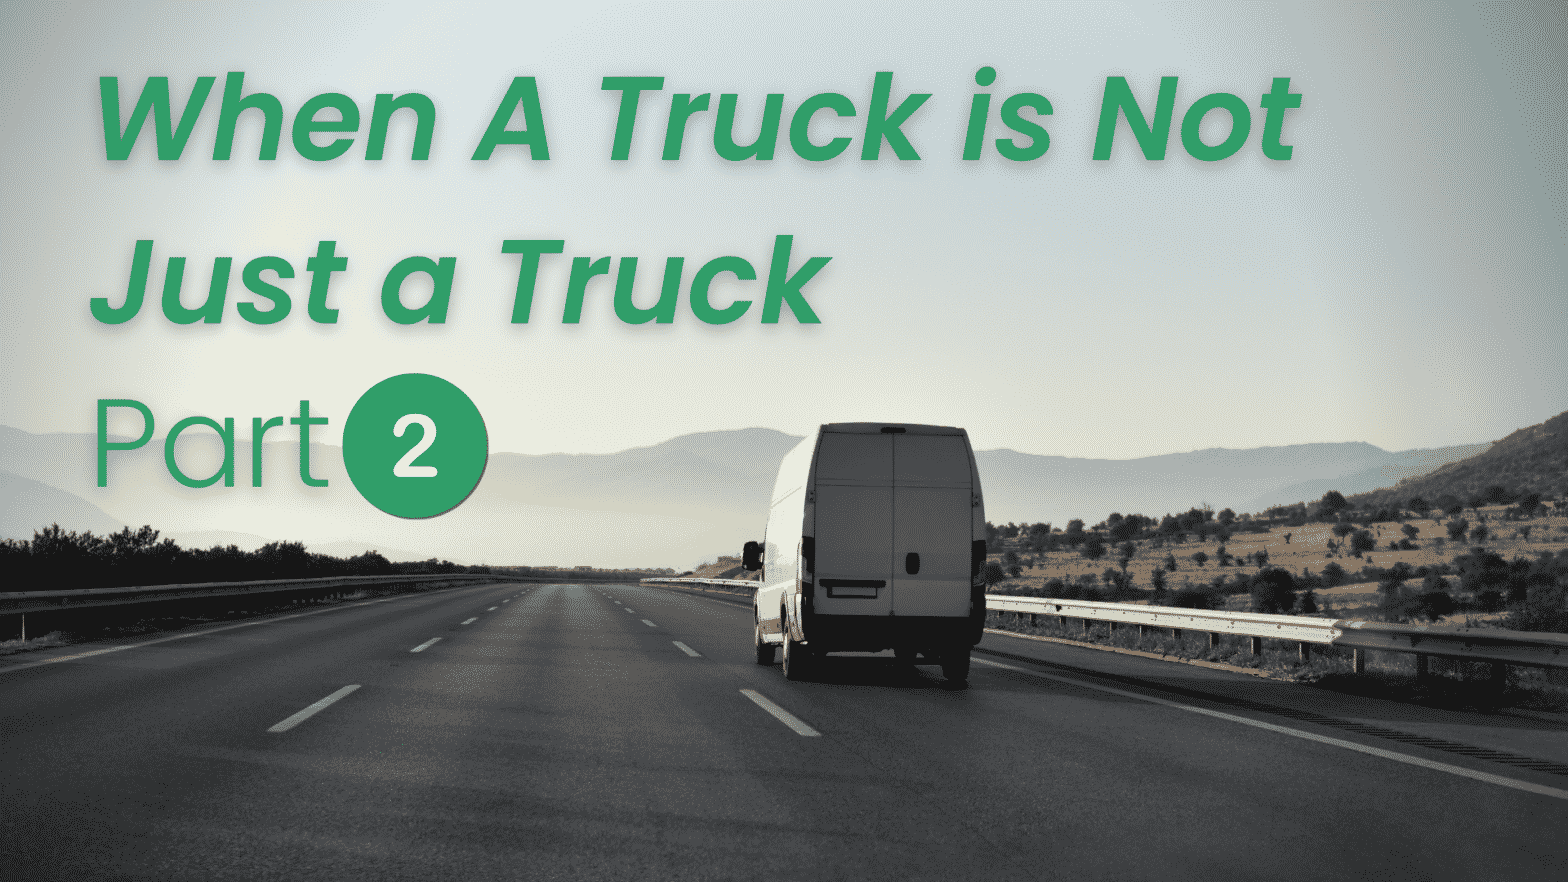 Photo of commercial motor vehicle with text reading: "When a truck is not just a truck: part 2